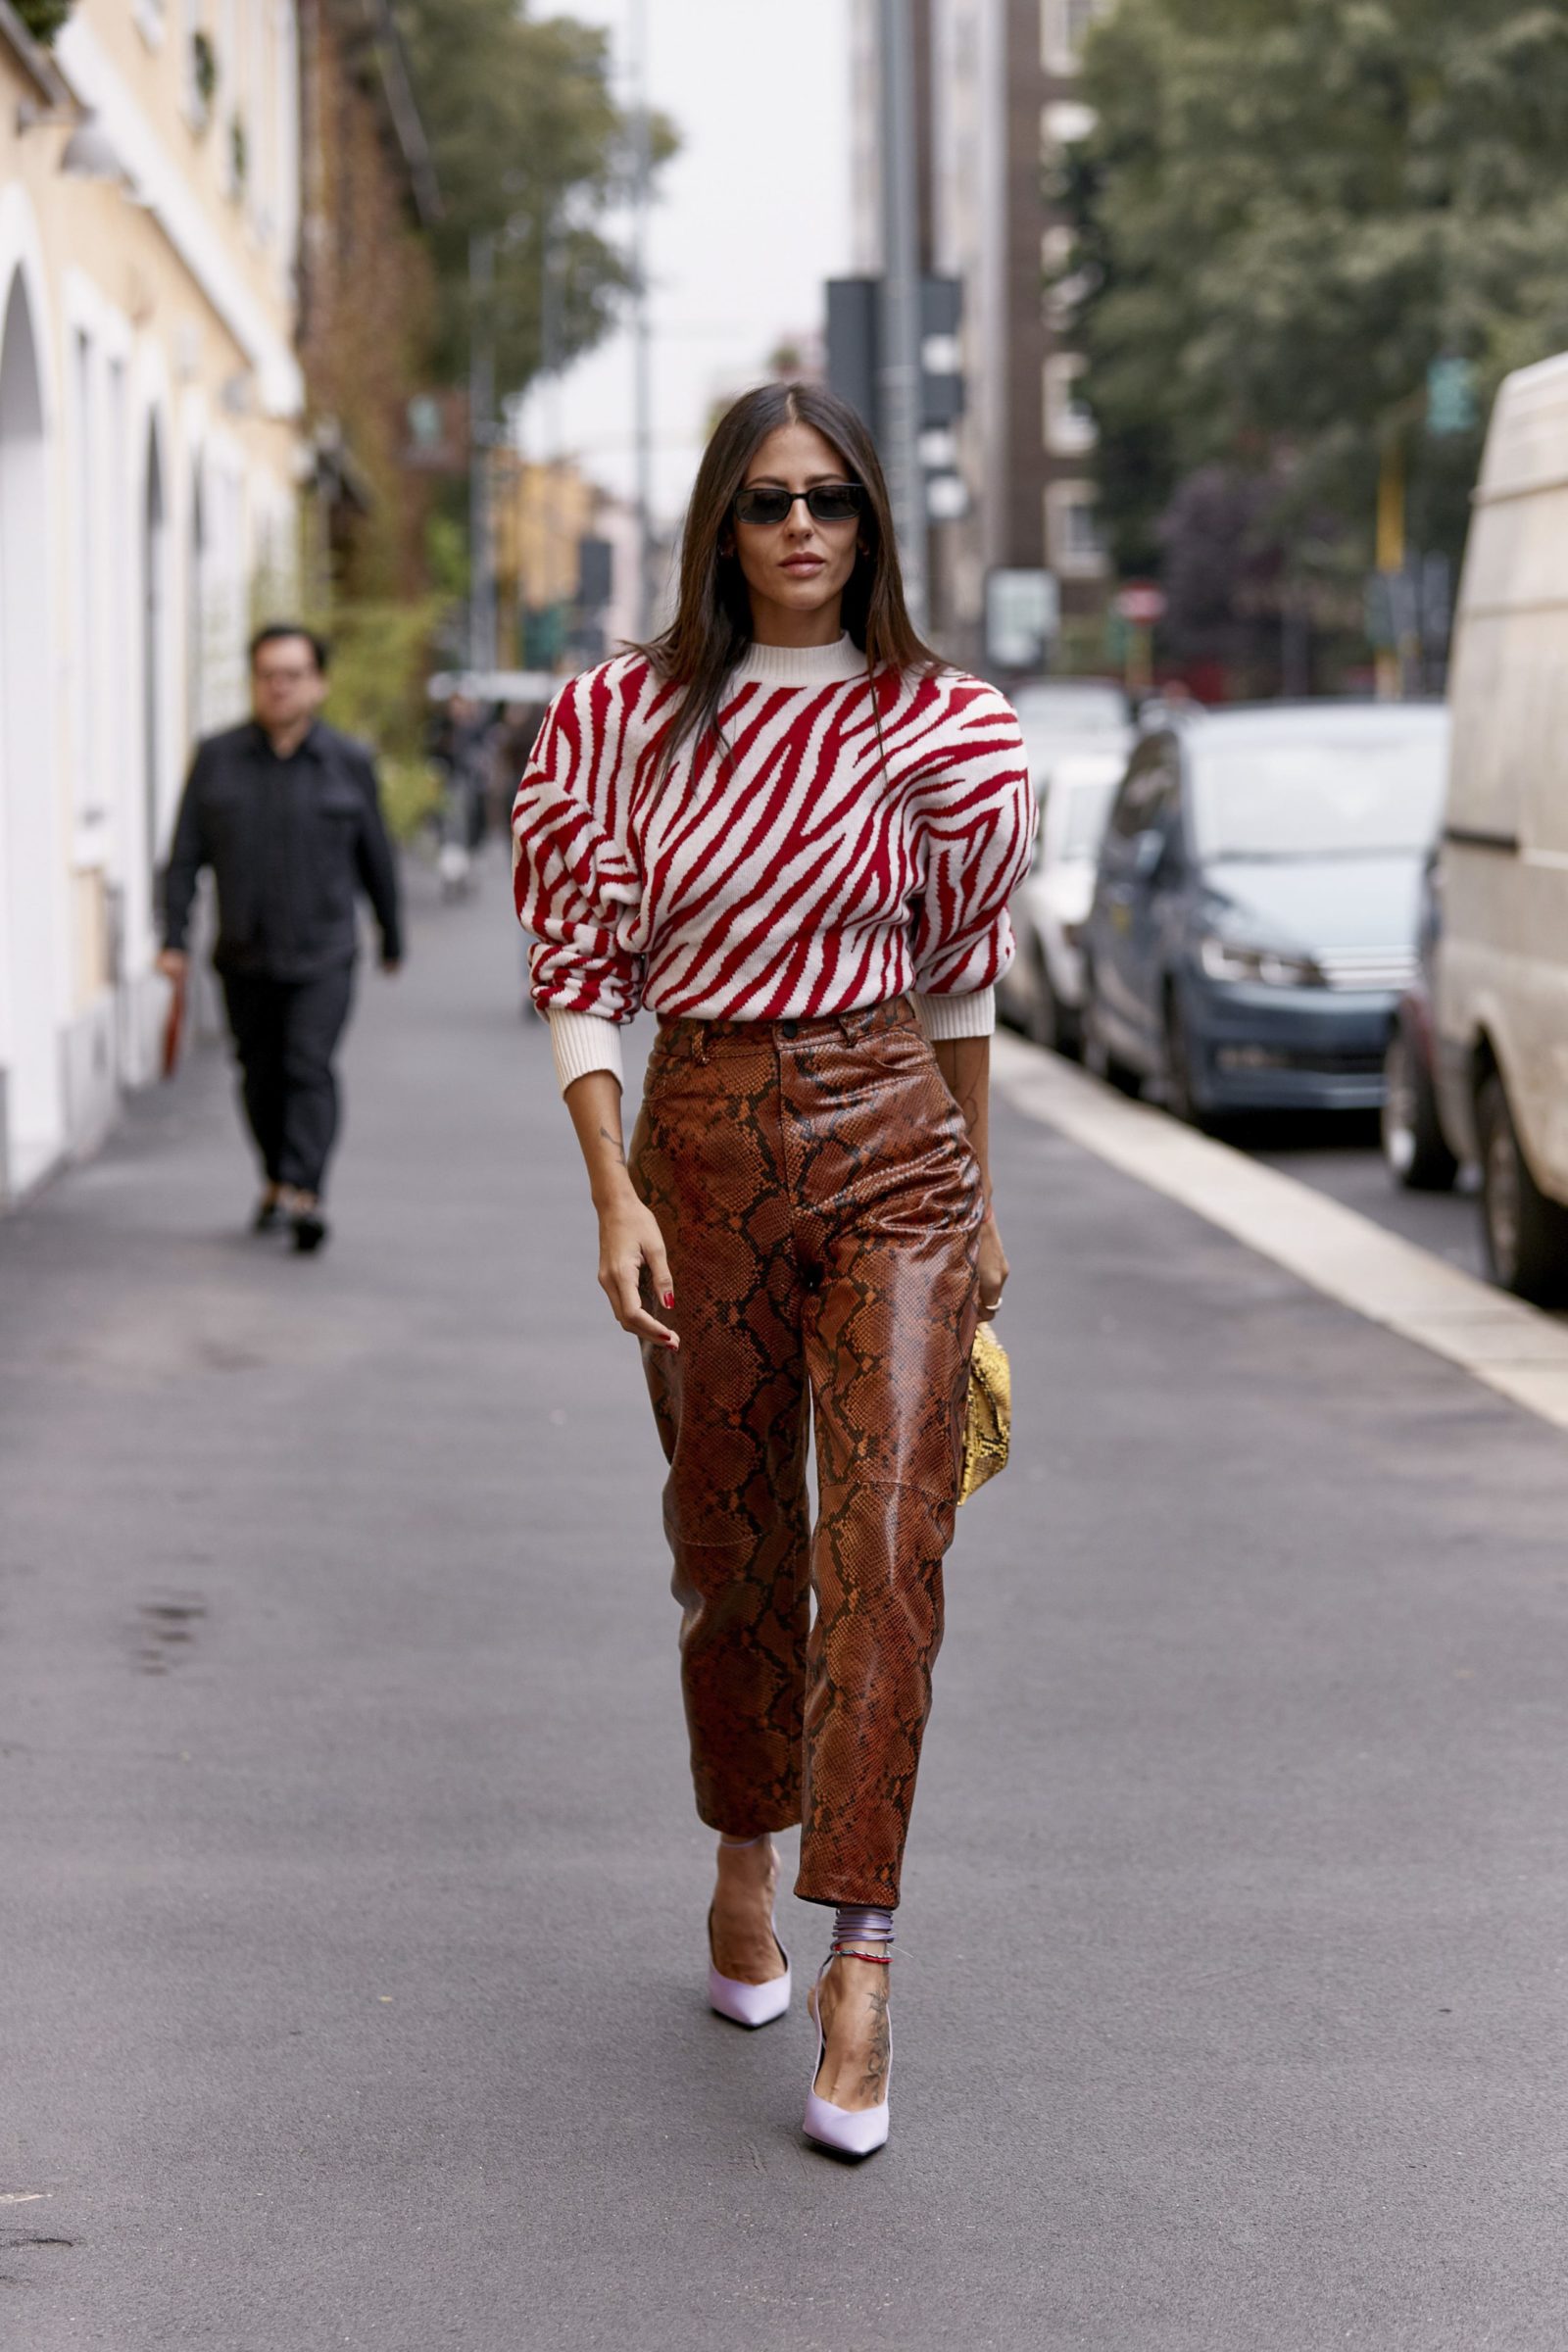 The Best Street Style Looks from Milan Fashion Week - FASHION Magazine